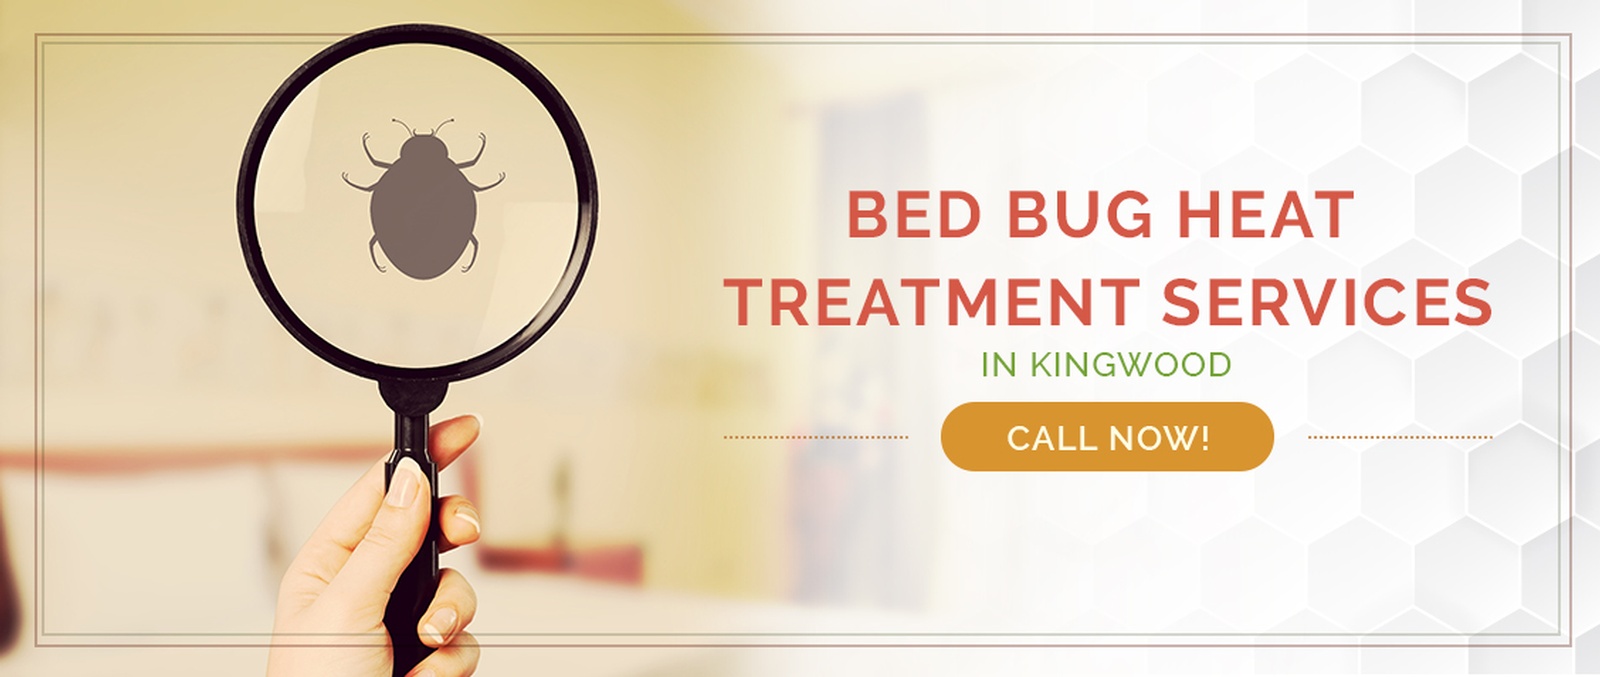 Kingwood Bed Bug Treatment / Heater Rental Services by Houston Bed Bug Heaters